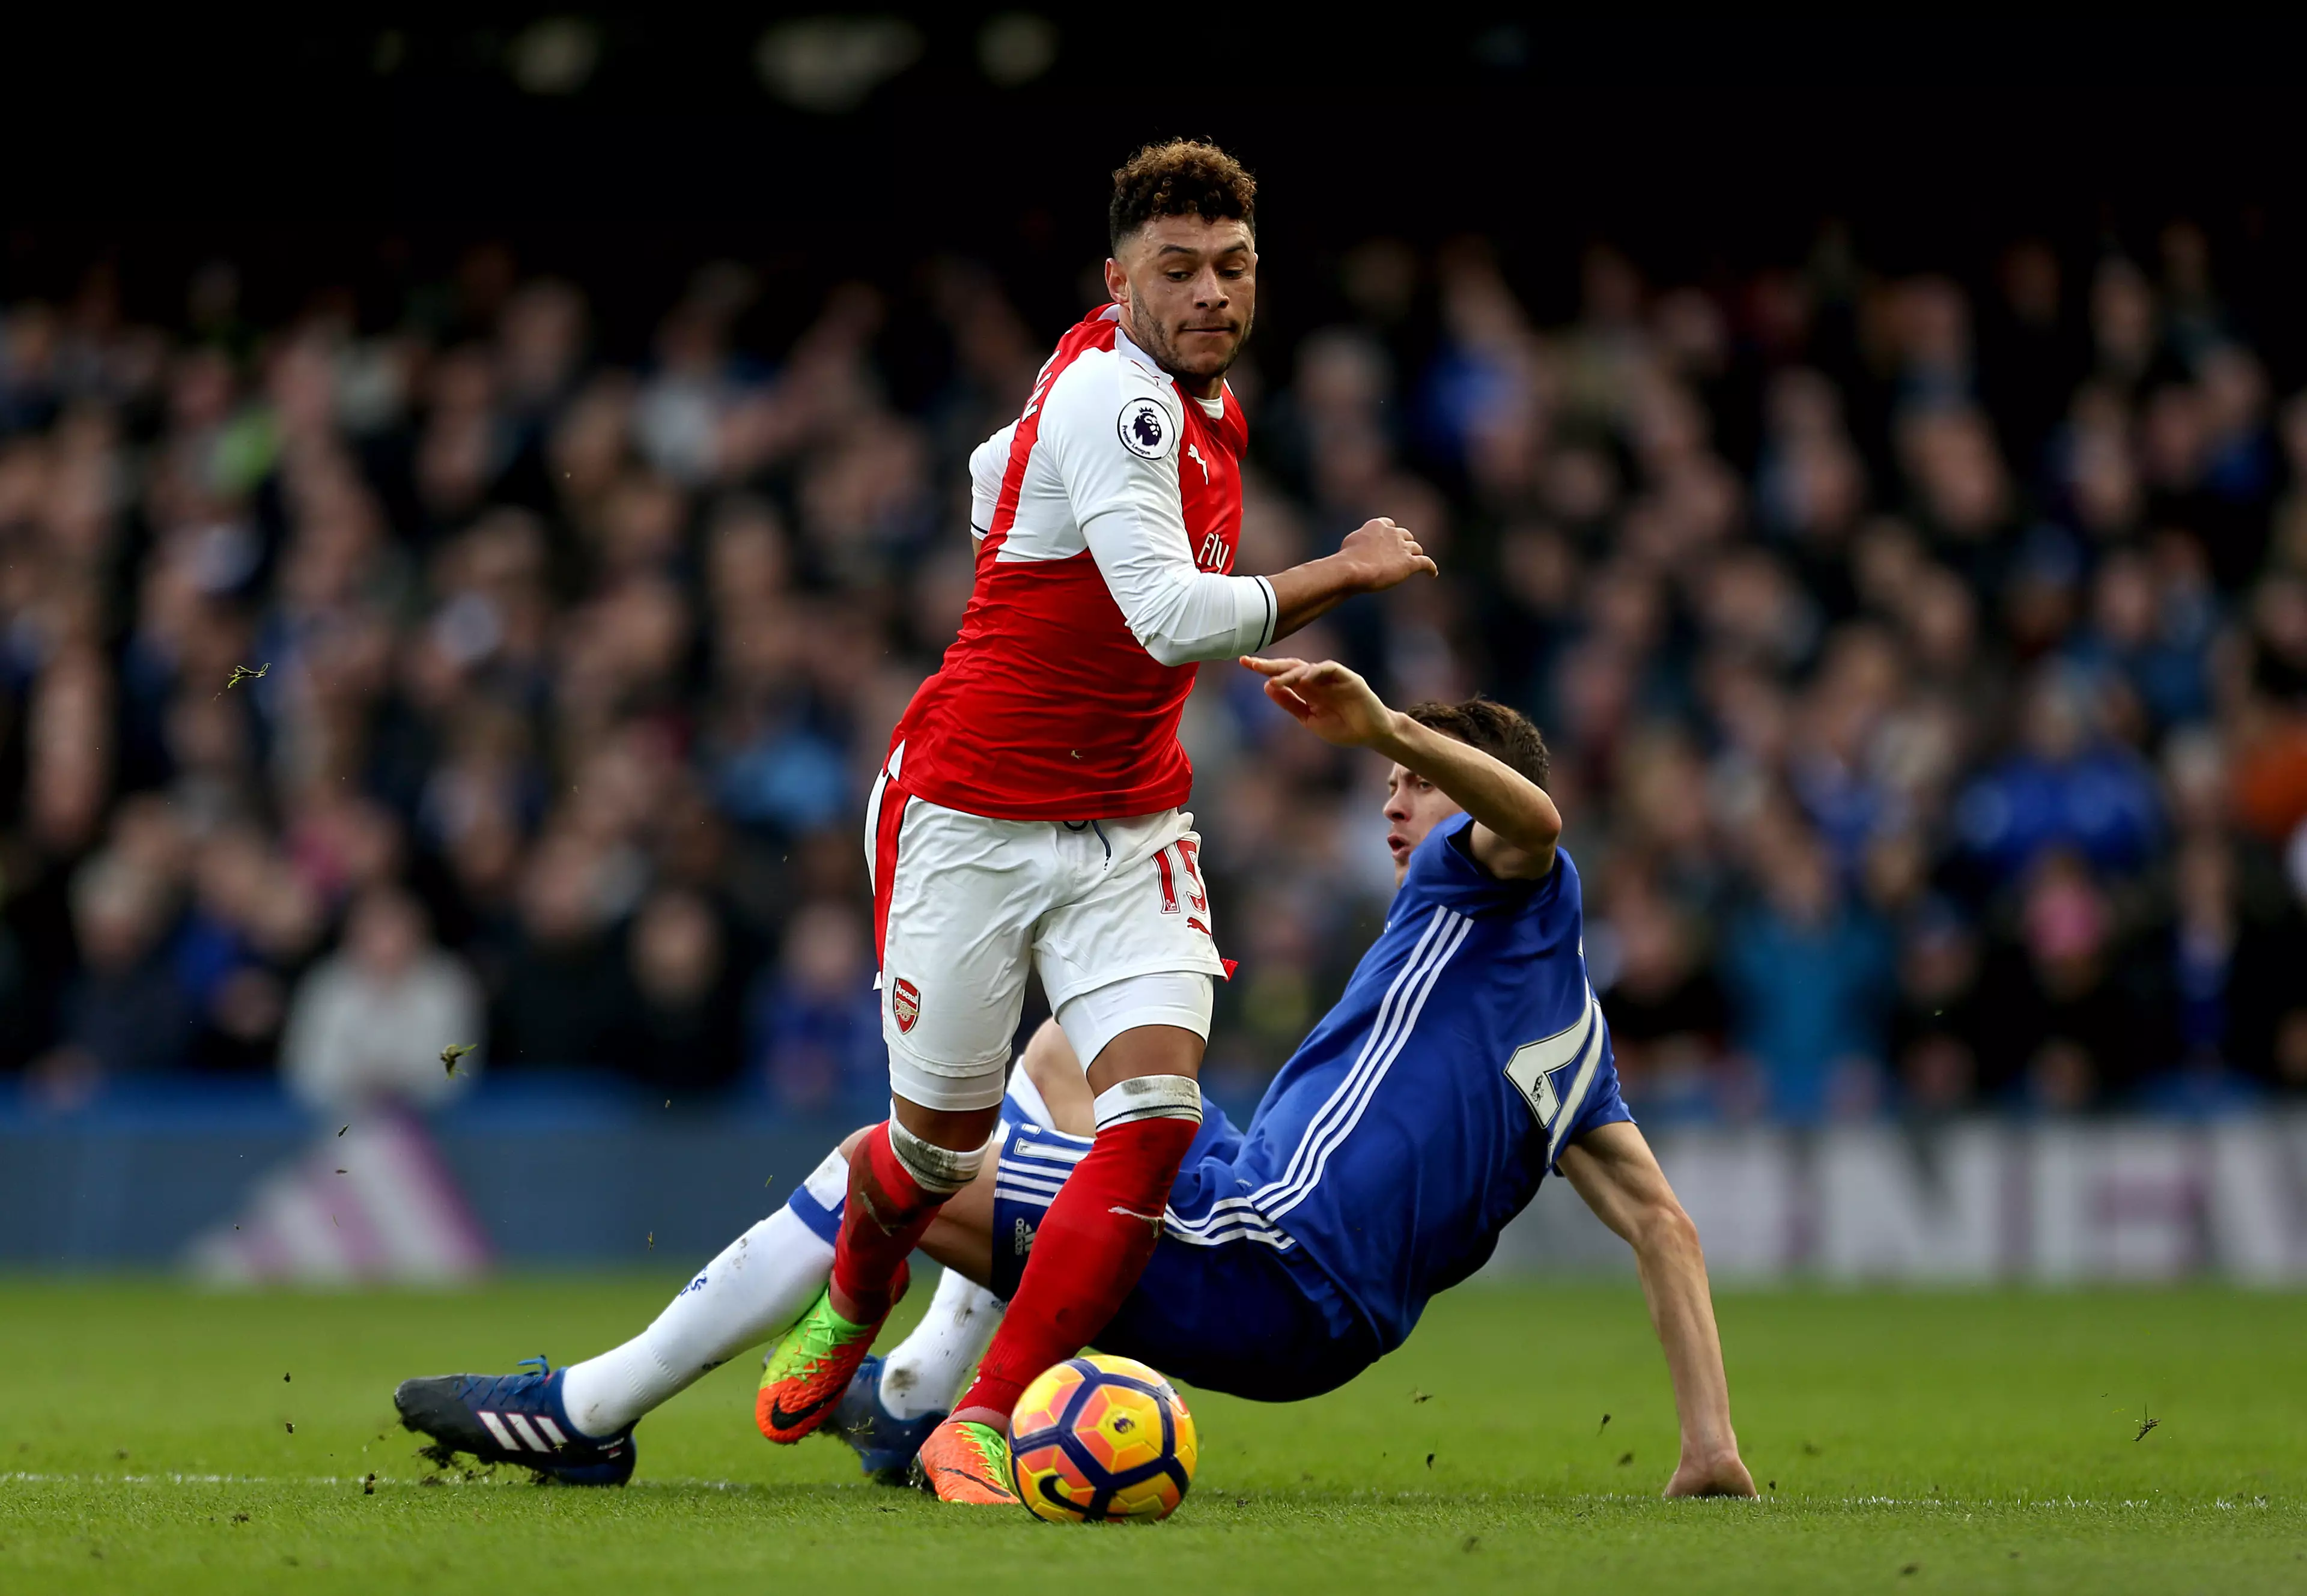 Alex Oxlade-Chamberlain's Latest Social Media Activity Could Land Him In Trouble